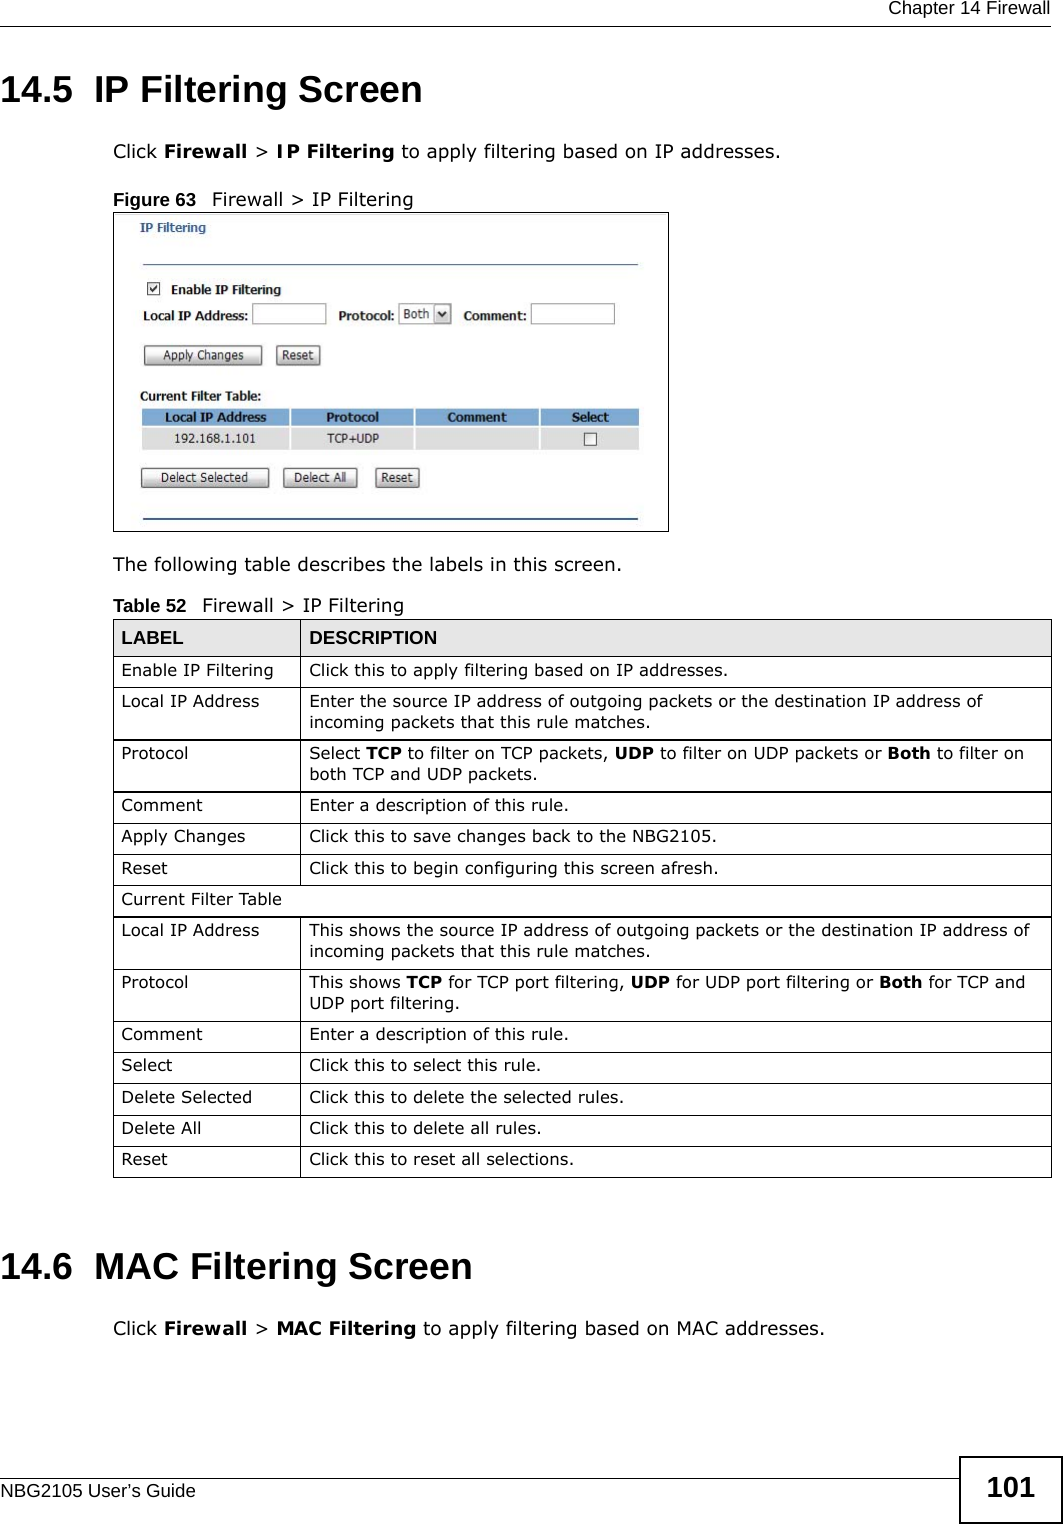  Chapter 14 FirewallNBG2105 User’s Guide 10114.5  IP Filtering ScreenClick Firewall &gt; IP Filtering to apply filtering based on IP addresses.Figure 63   Firewall &gt; IP Filtering The following table describes the labels in this screen.14.6  MAC Filtering ScreenClick Firewall &gt; MAC Filtering to apply filtering based on MAC addresses.Table 52   Firewall &gt; IP FilteringLABEL DESCRIPTIONEnable IP Filtering Click this to apply filtering based on IP addresses.Local IP Address Enter the source IP address of outgoing packets or the destination IP address of incoming packets that this rule matches.Protocol Select TCP to filter on TCP packets, UDP to filter on UDP packets or Both to filter on both TCP and UDP packets.Comment Enter a description of this rule.Apply Changes Click this to save changes back to the NBG2105.Reset Click this to begin configuring this screen afresh.Current Filter TableLocal IP Address This shows the source IP address of outgoing packets or the destination IP address of incoming packets that this rule matches.Protocol This shows TCP for TCP port filtering, UDP for UDP port filtering or Both for TCP and UDP port filtering.Comment Enter a description of this rule.Select Click this to select this rule.Delete Selected Click this to delete the selected rules.Delete All Click this to delete all rules.Reset Click this to reset all selections.